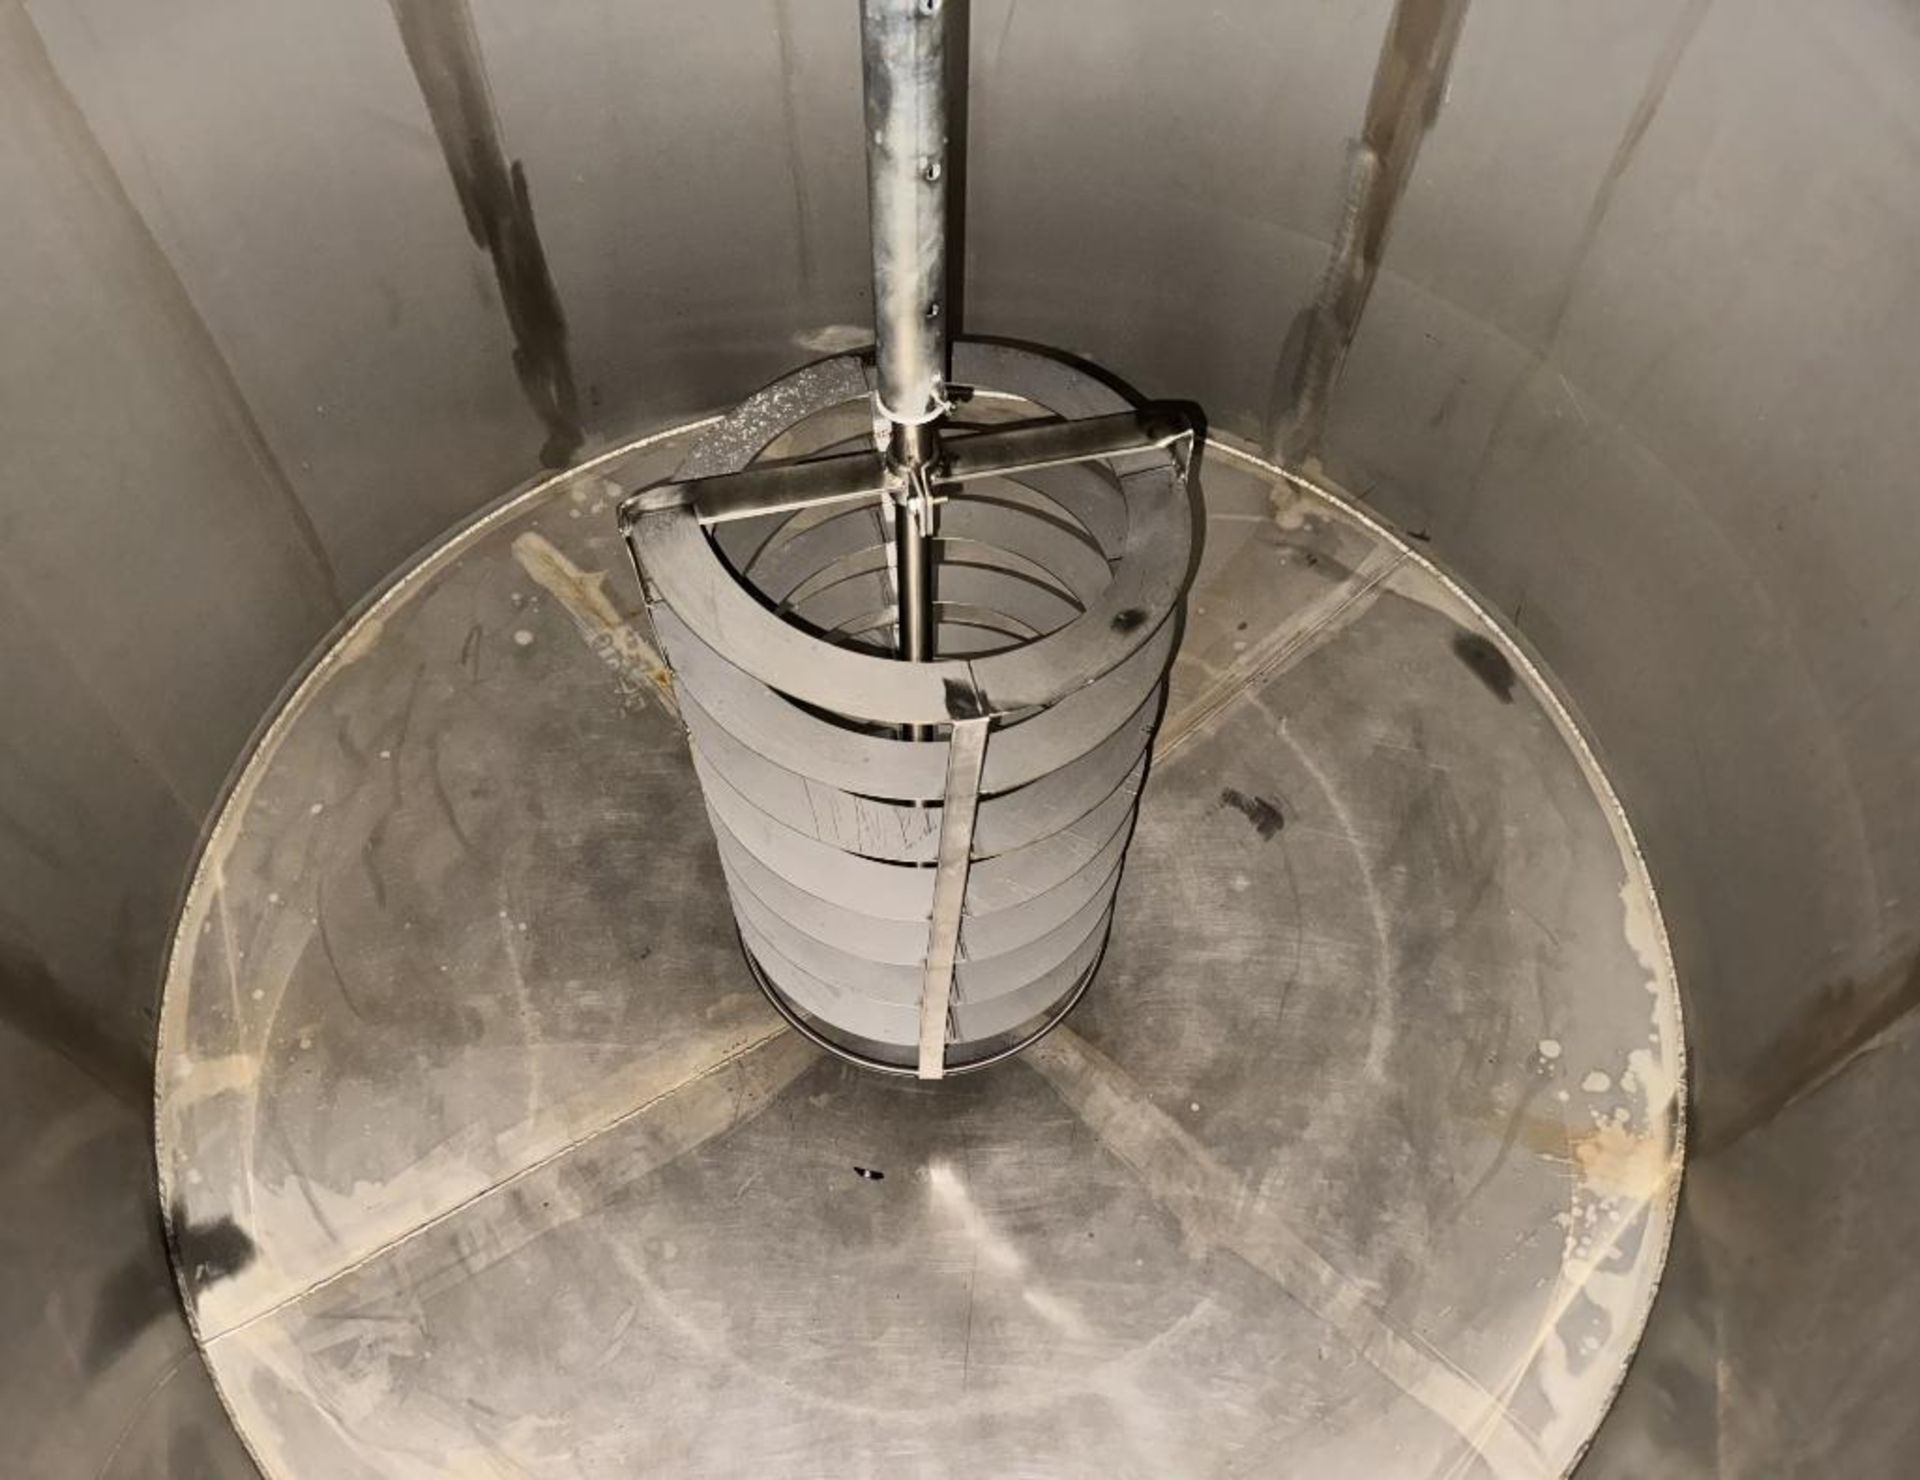 Approximate 750 Gallon Stainless Steel Jacketed Mix Tank. Approximate 66" diameter x 50" straight si - Image 6 of 9